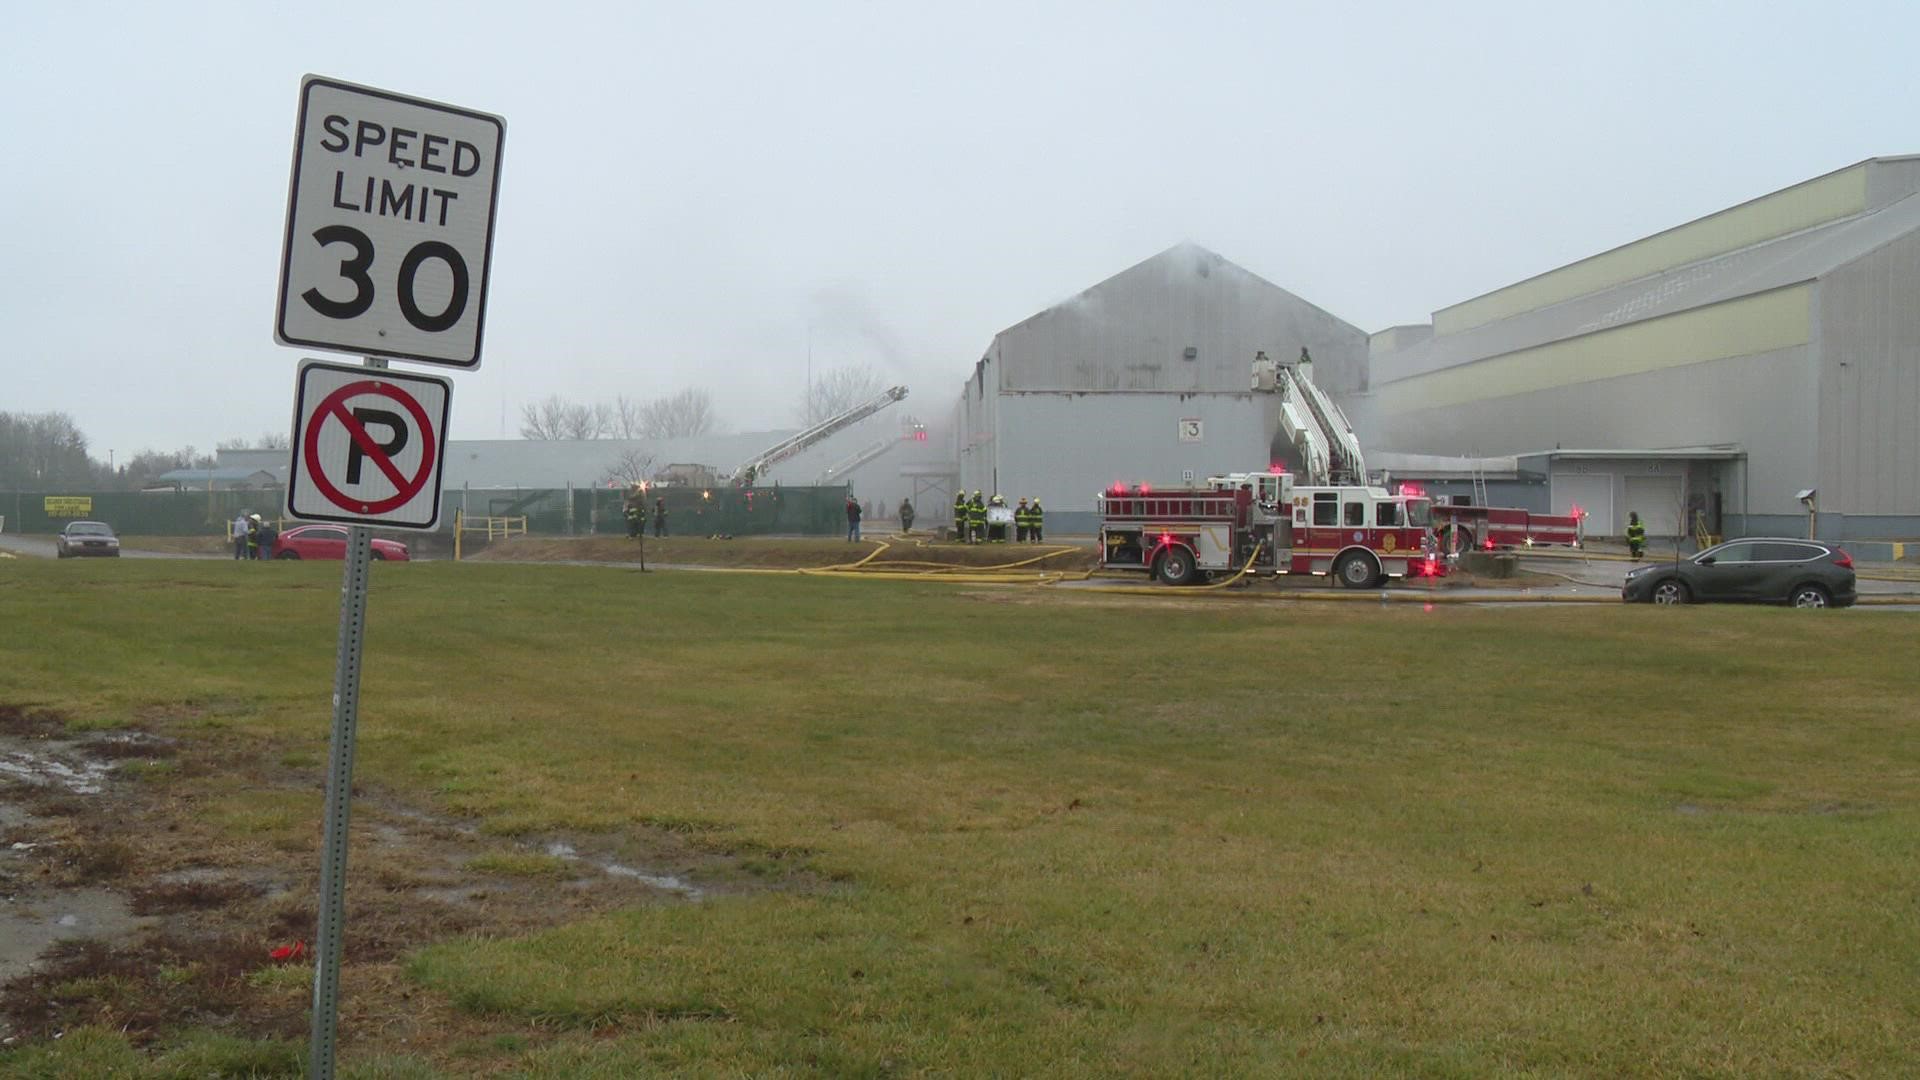 The building was unoccupied when the fire broke out Saturday morning.